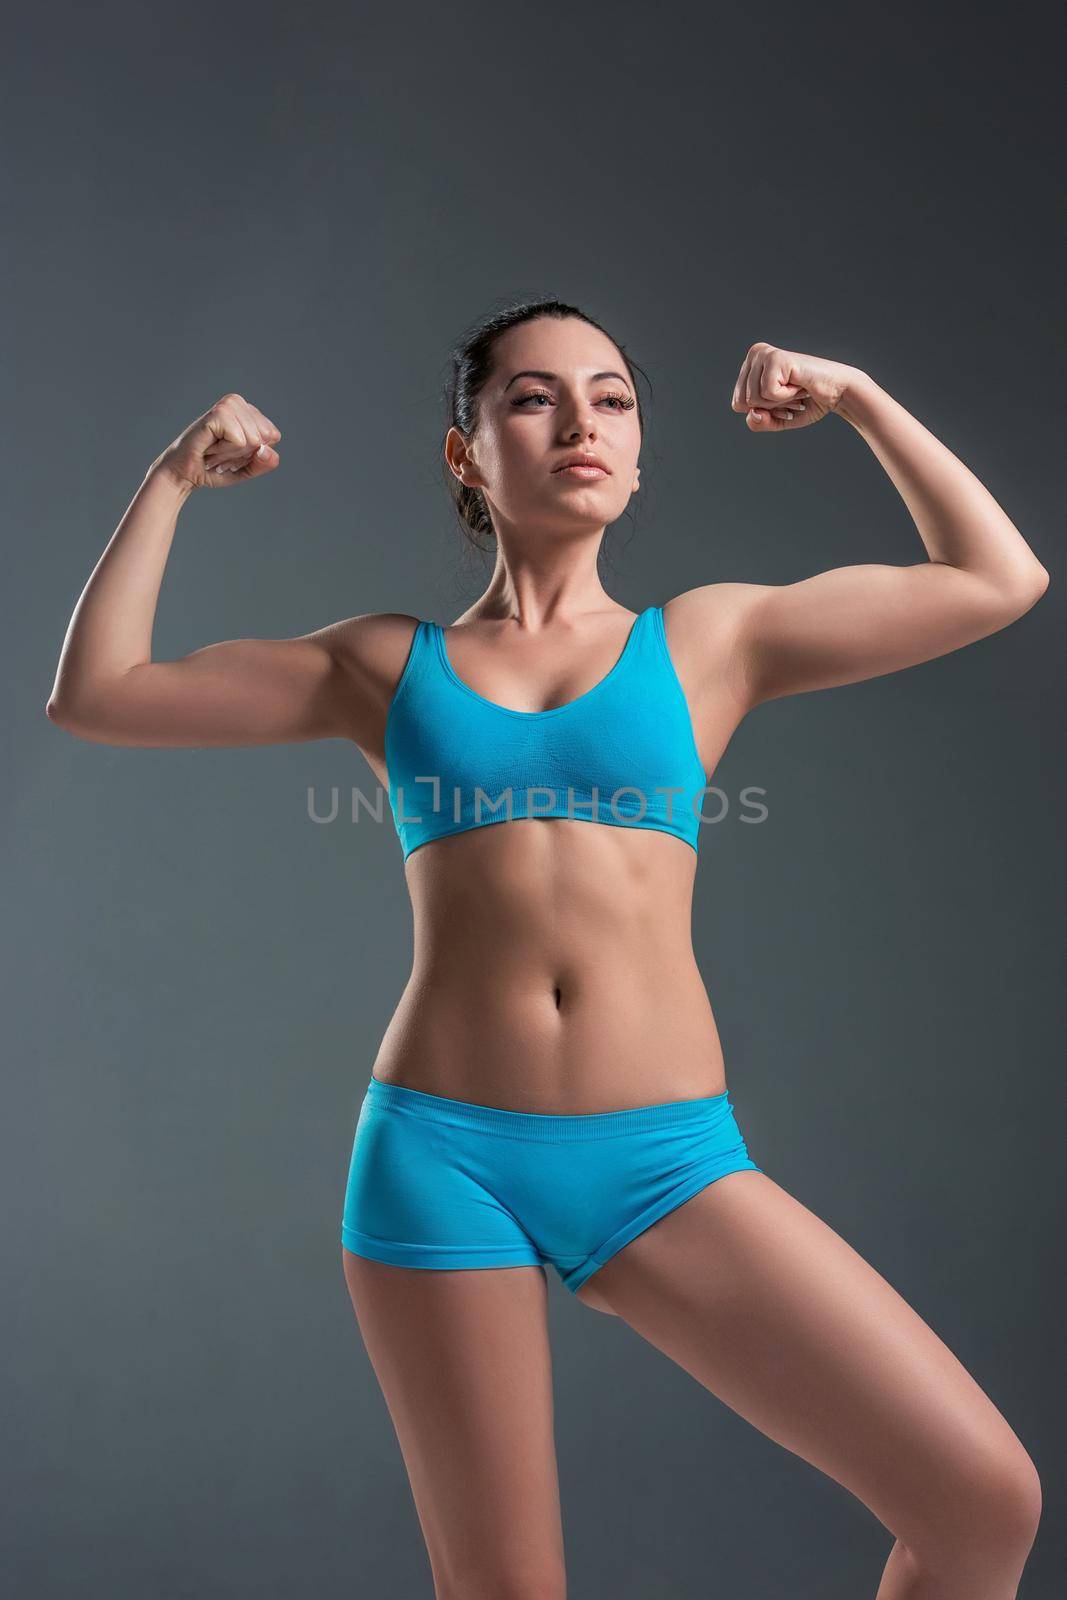 Muscular young woman athlete standing looking to the right. Raise your hands up. It shows strength